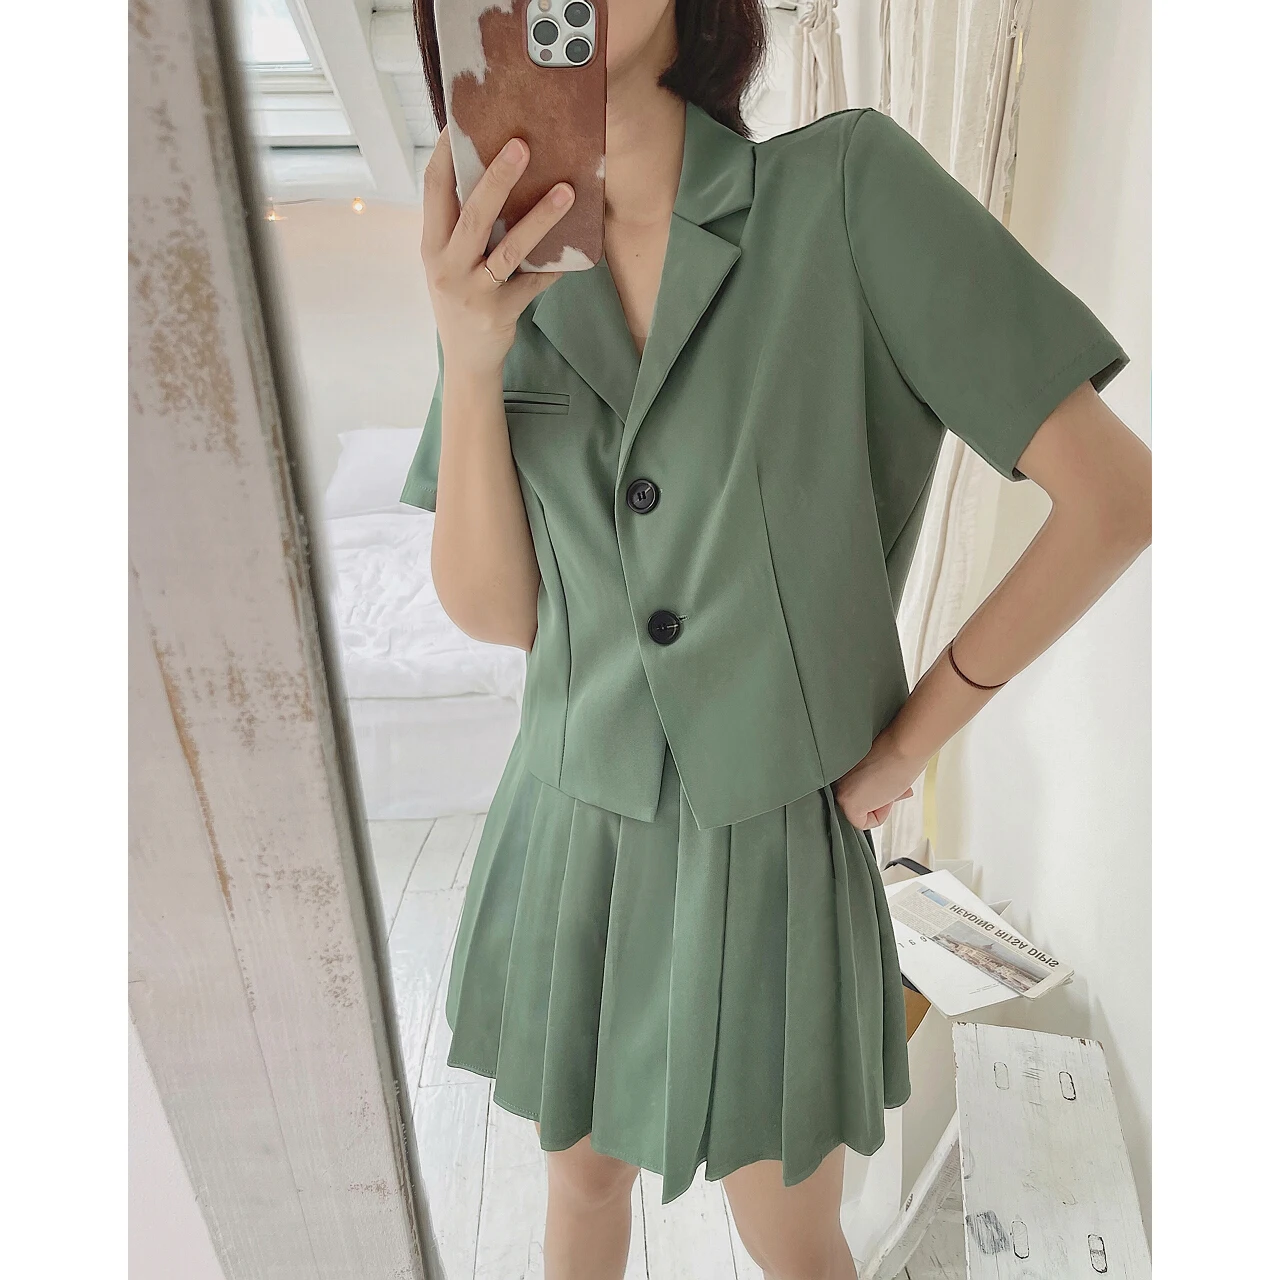 2022 New Woman Set 2 Pieces Tracksuit Suit Y2k Clothes Crop Top Pleated Skirt Short Sleeve Jacket Shorts Summer Outfit Urban Oem bubble sleeve drawstring pleated chiffon shirt khaki casual pants two piece student activism suit summer outfits tracksuit